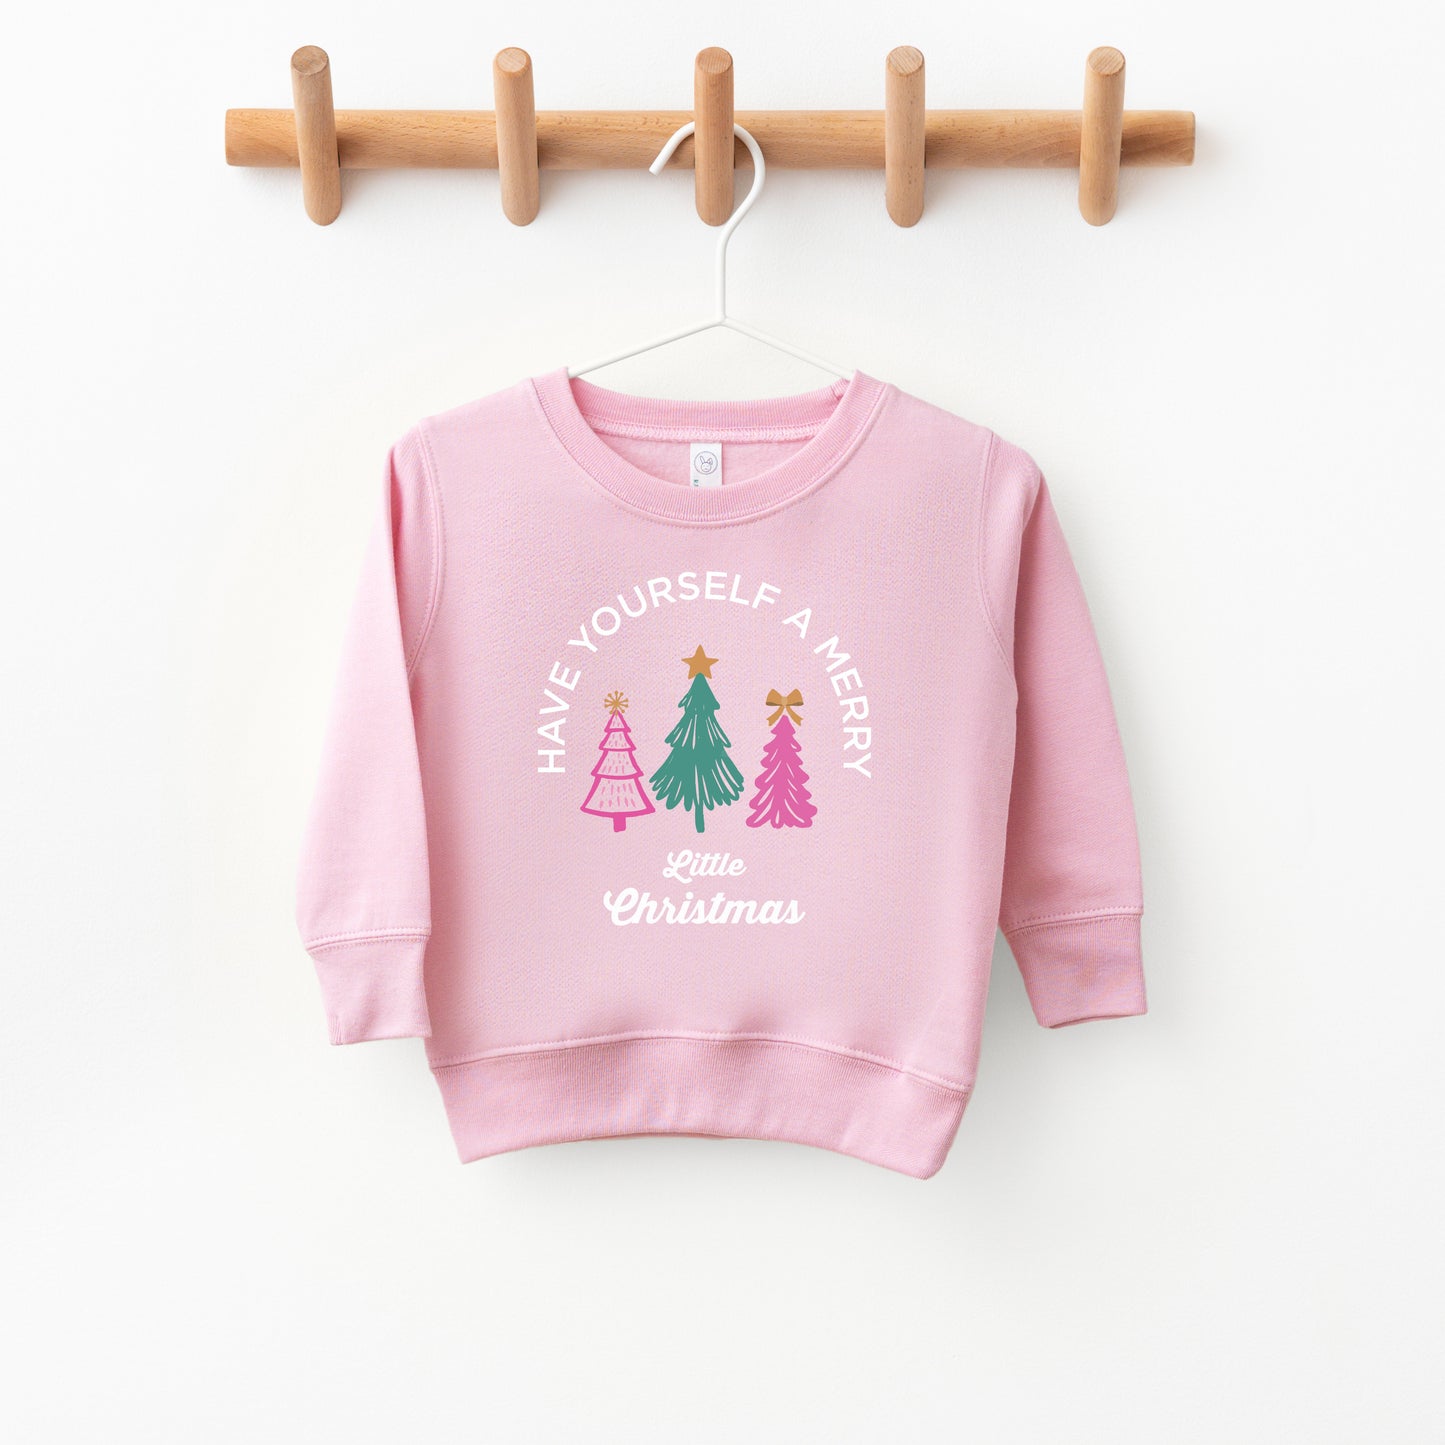 Have Yourself A Merry Little Christmas Toddler Crewneck